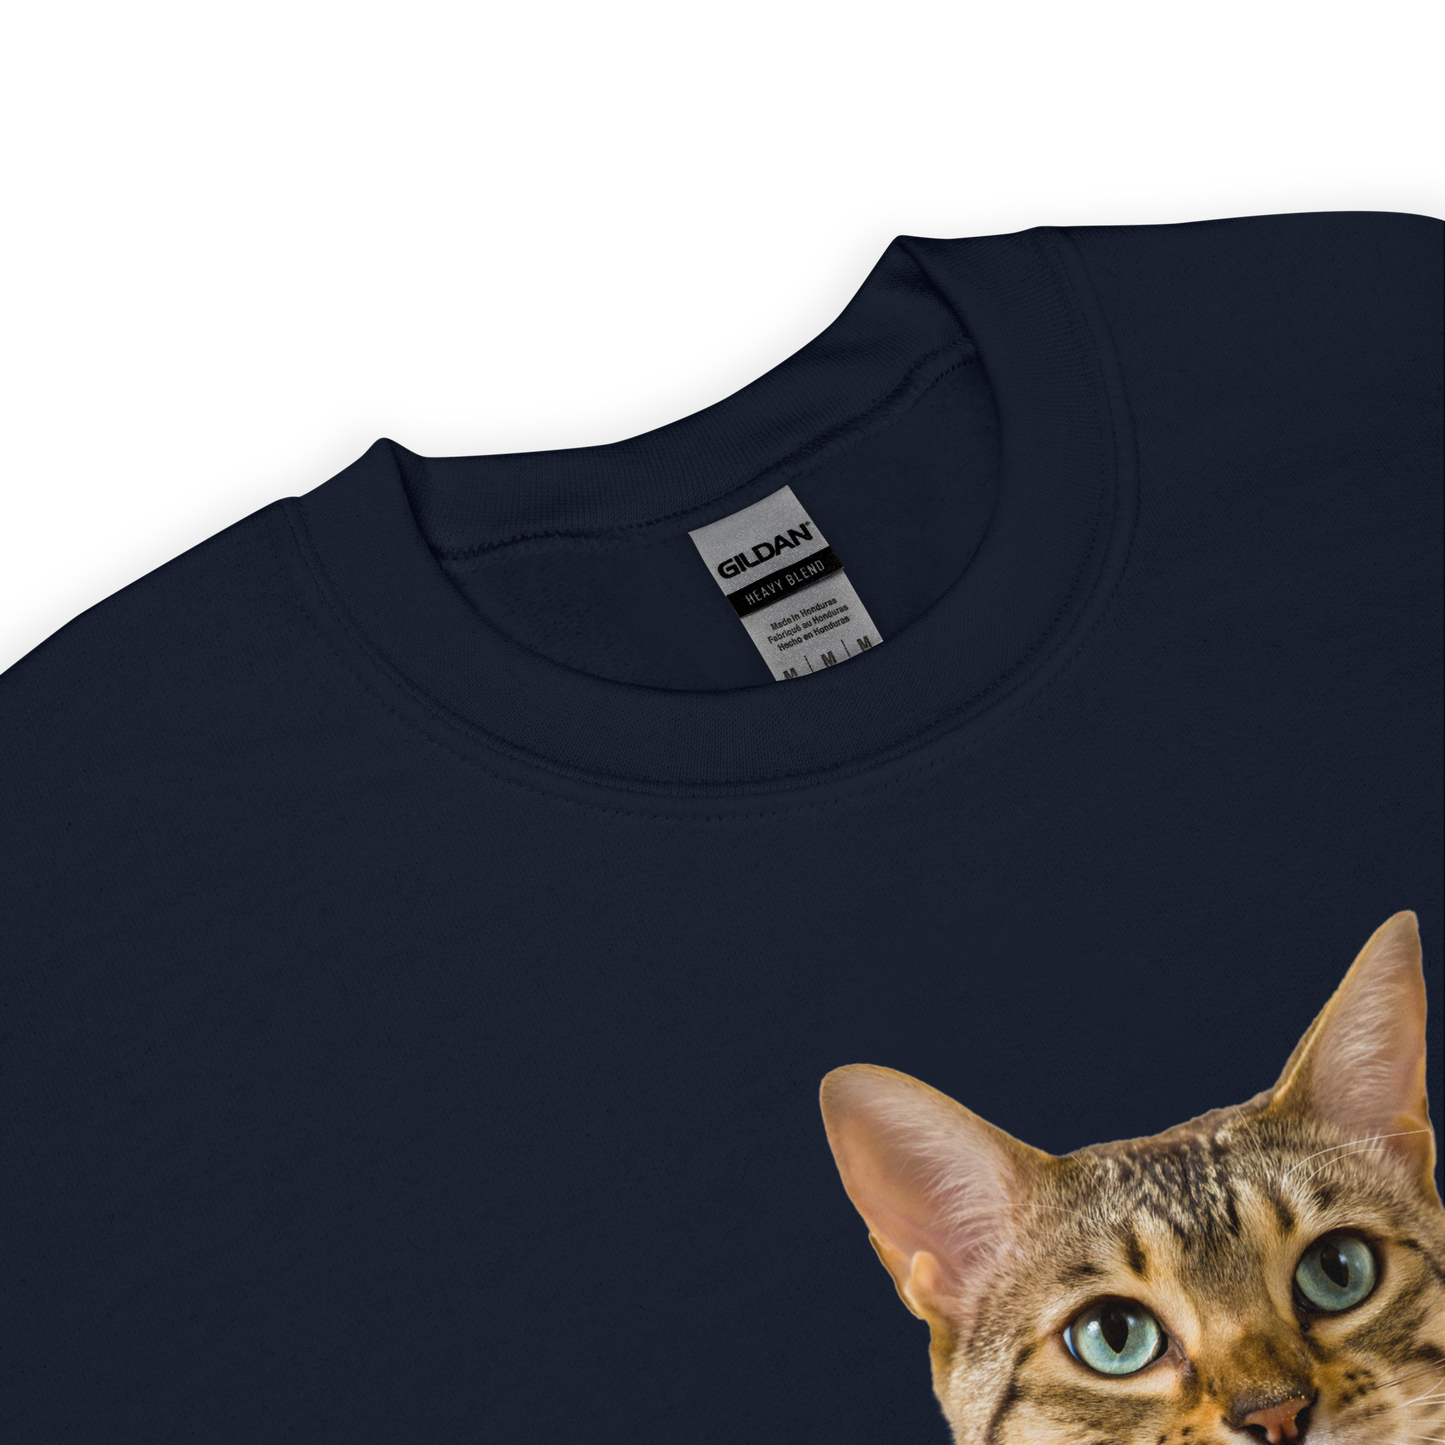 Product Details of a Navy Cat Sweatshirt featuring a Purrfect graphic on the chest - Funny Graphic Cat Sweatshirts - Boozy Fox